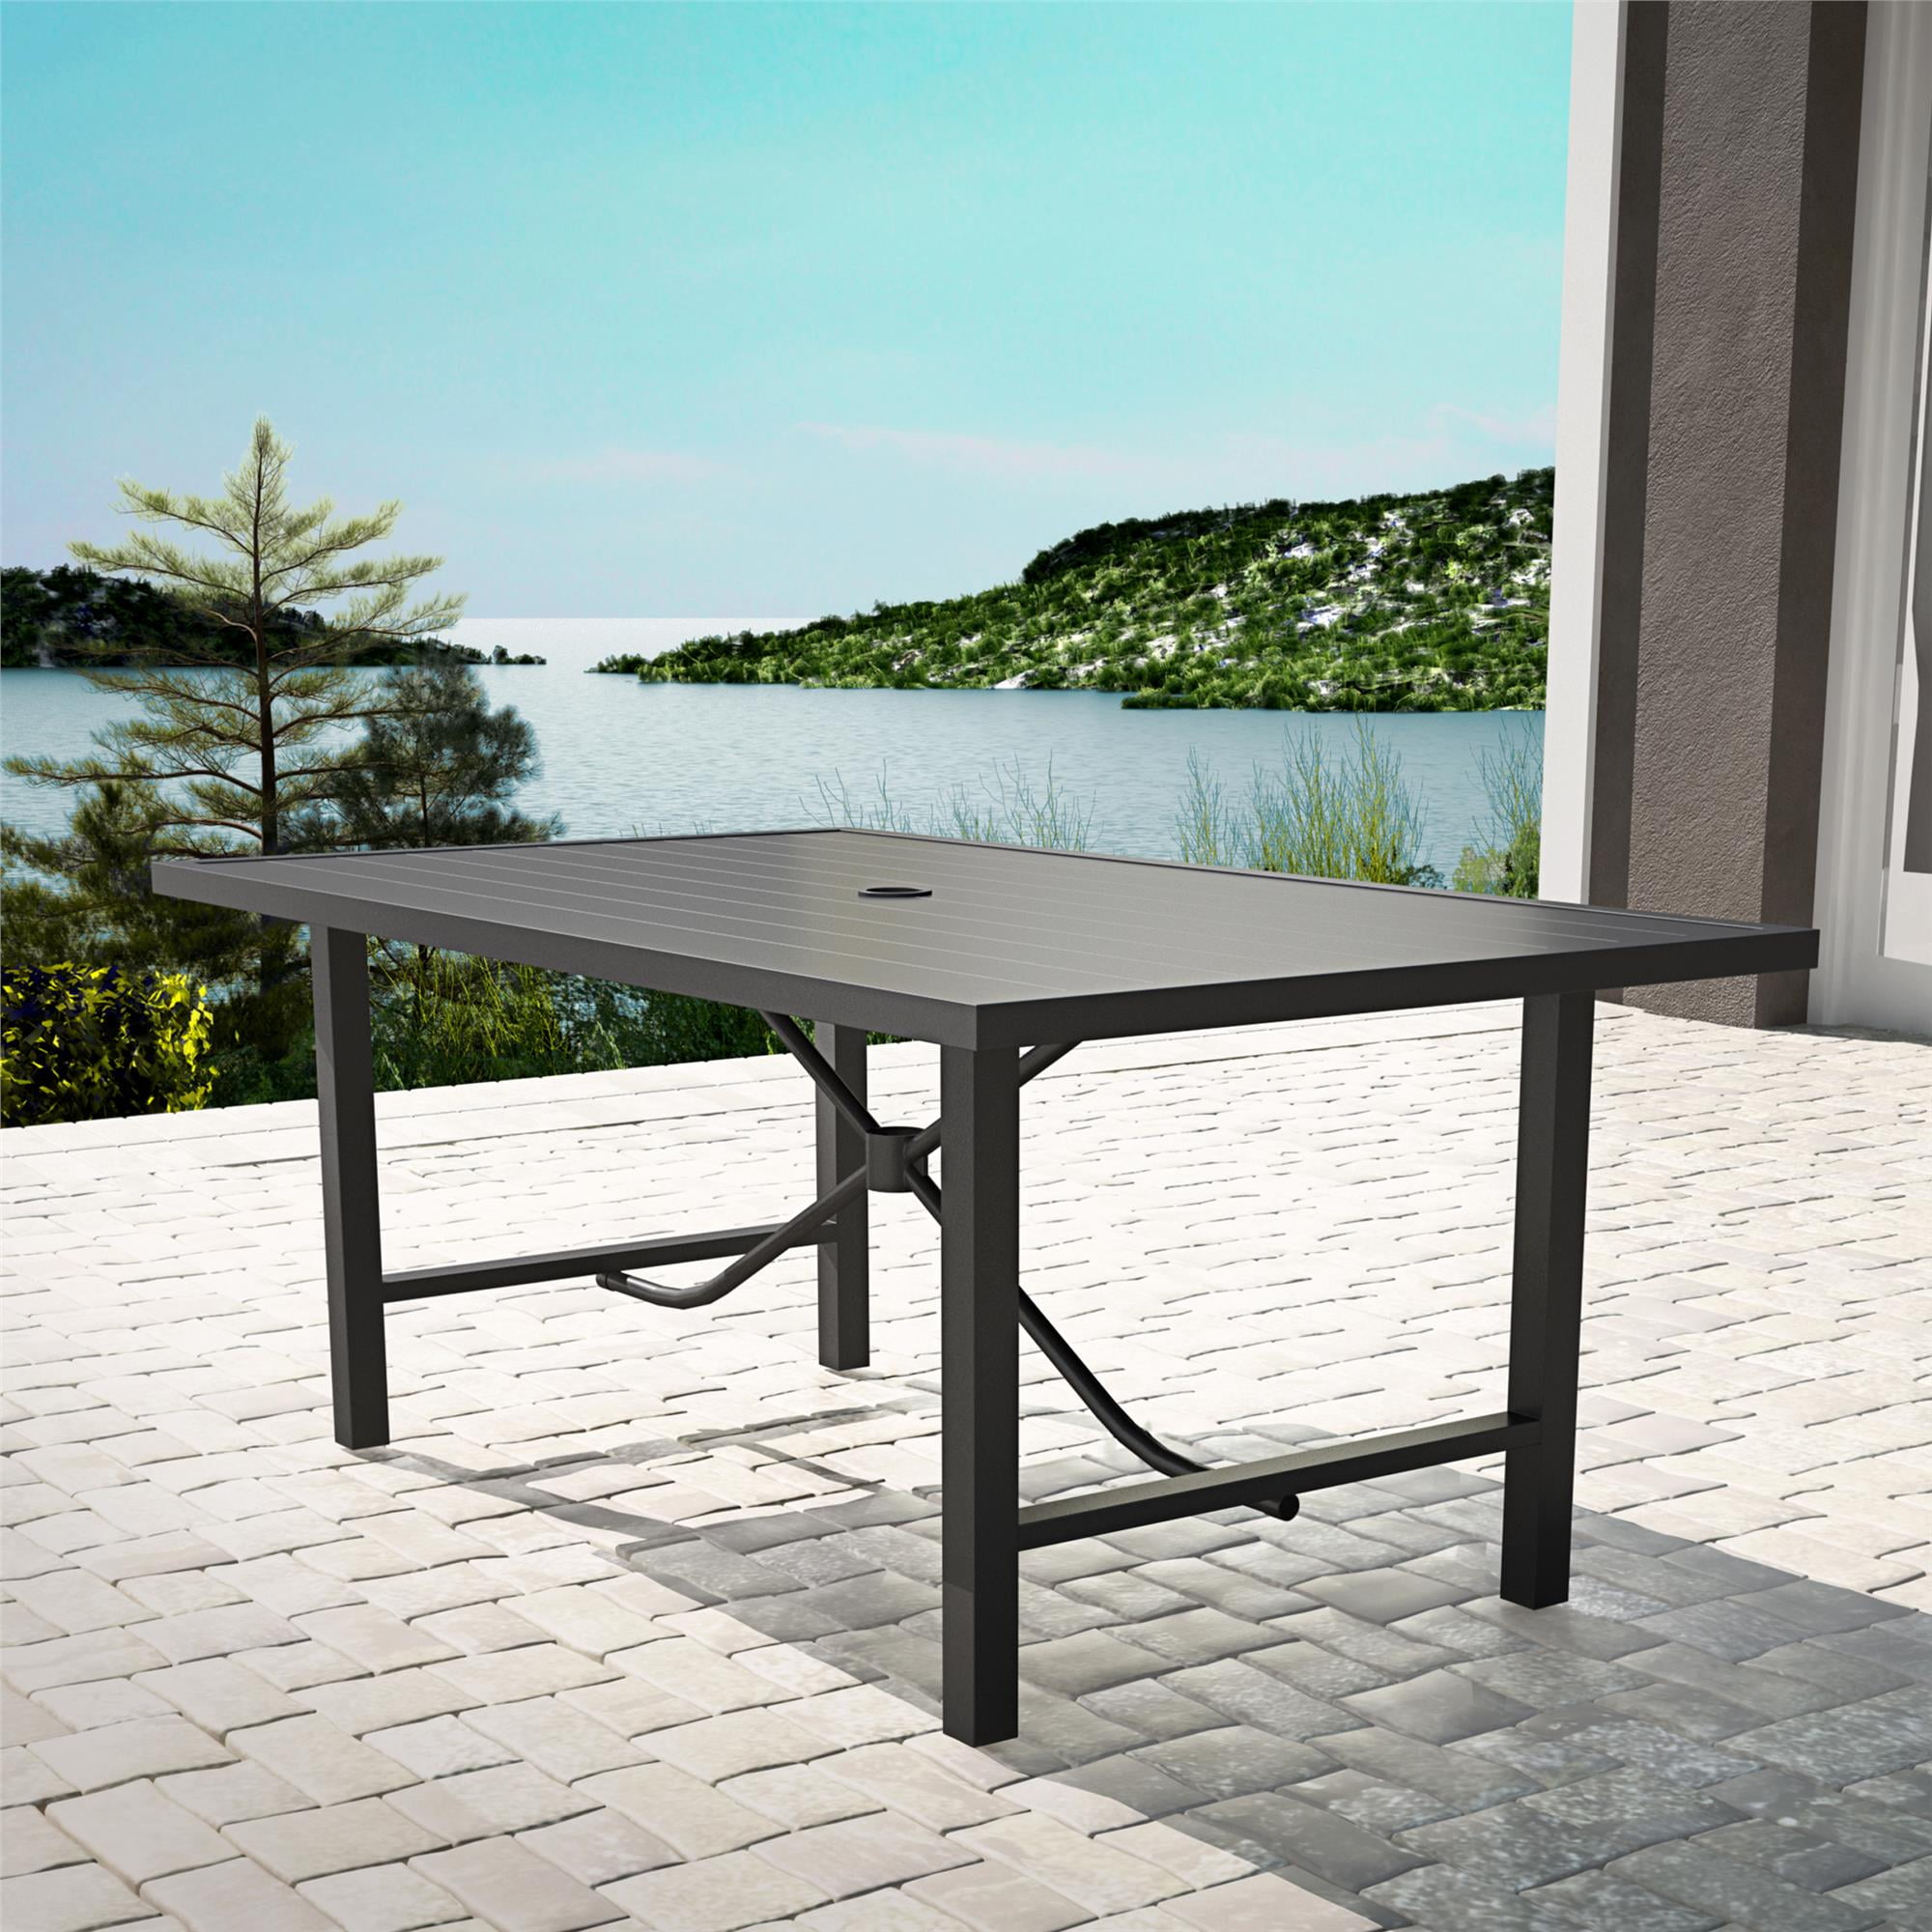 COSCO Outdoor Furniture, Patio Dining Table, Steel, Charcoal - Walmart.com